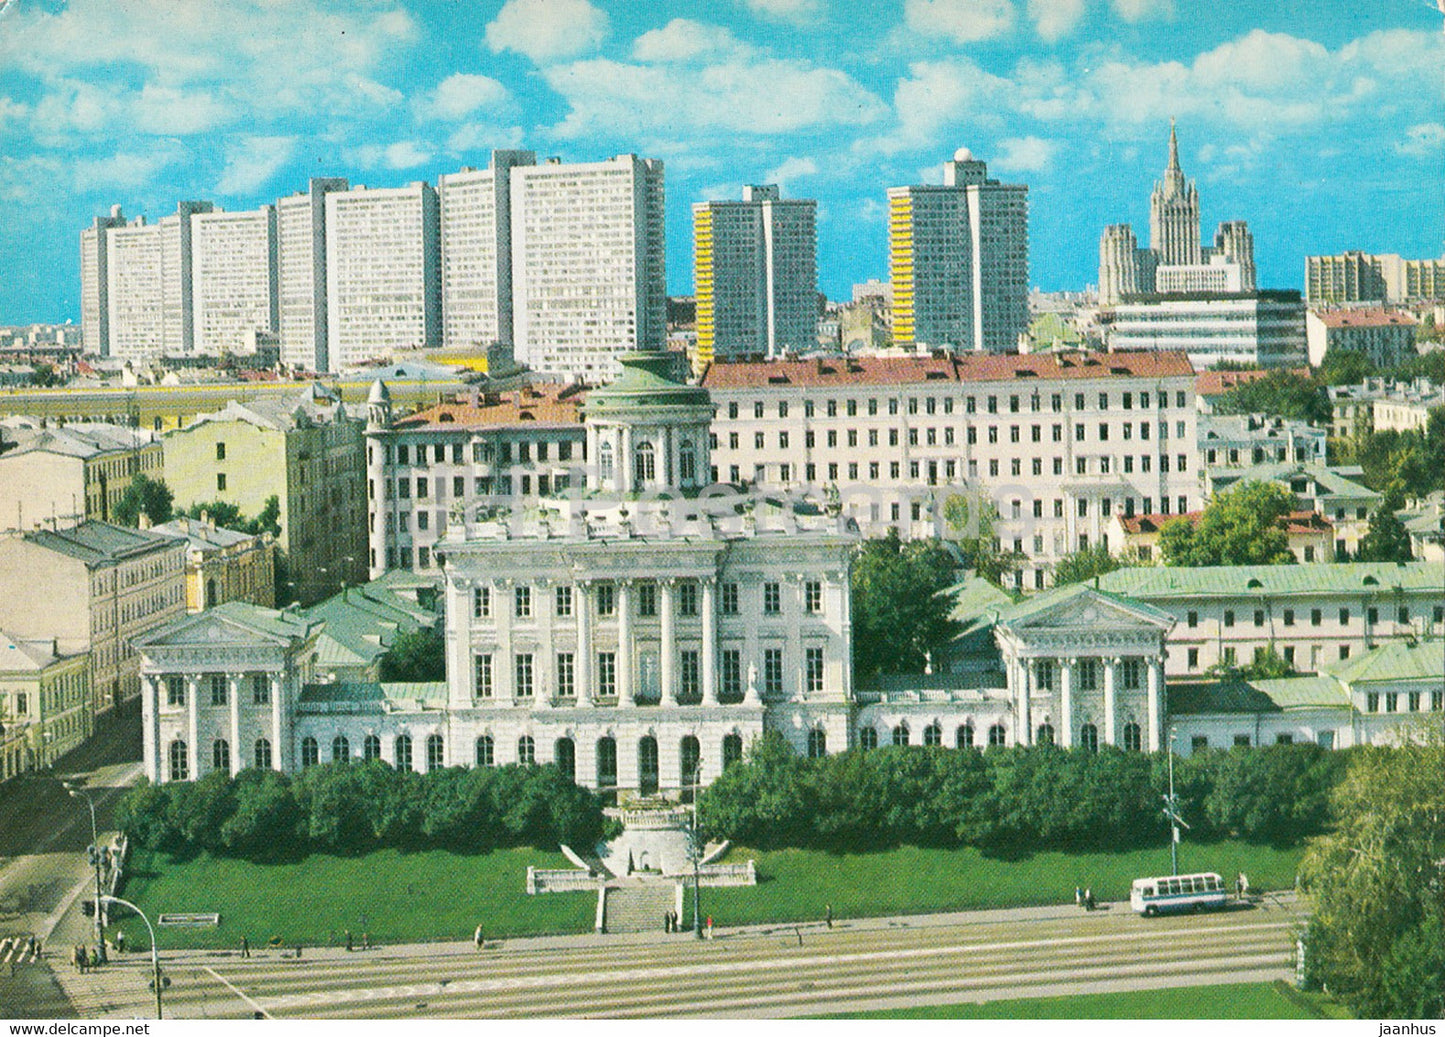 Moscow - City Panorama - postal stationery - 1977 - Russia USSR - unused - JH Postcards